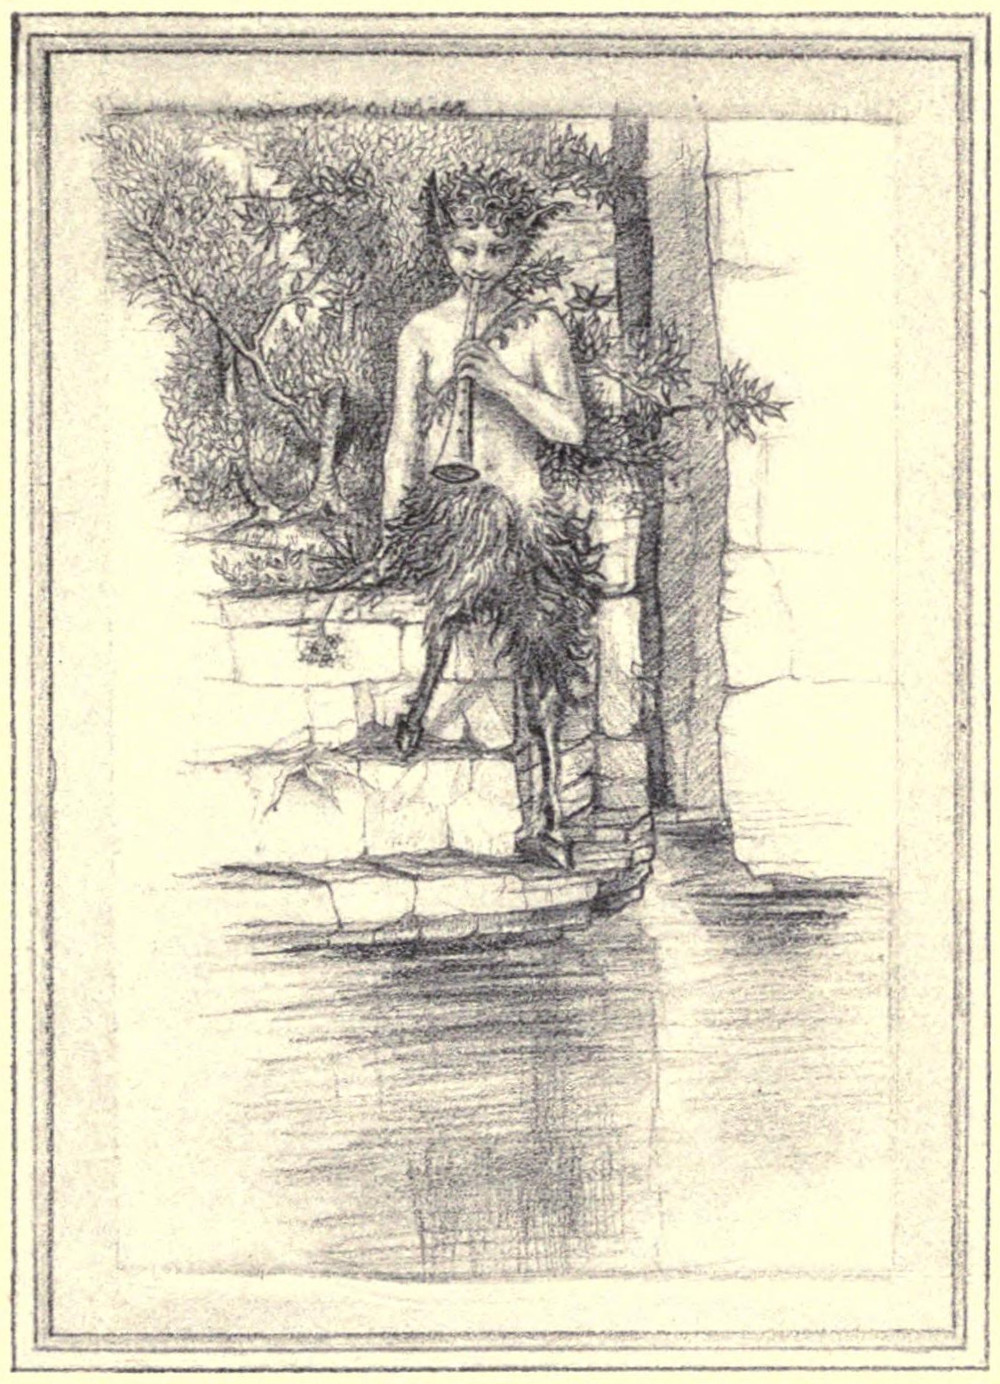 Illustration: Upon the rocks was the young faun sitting, and playing on his pipes